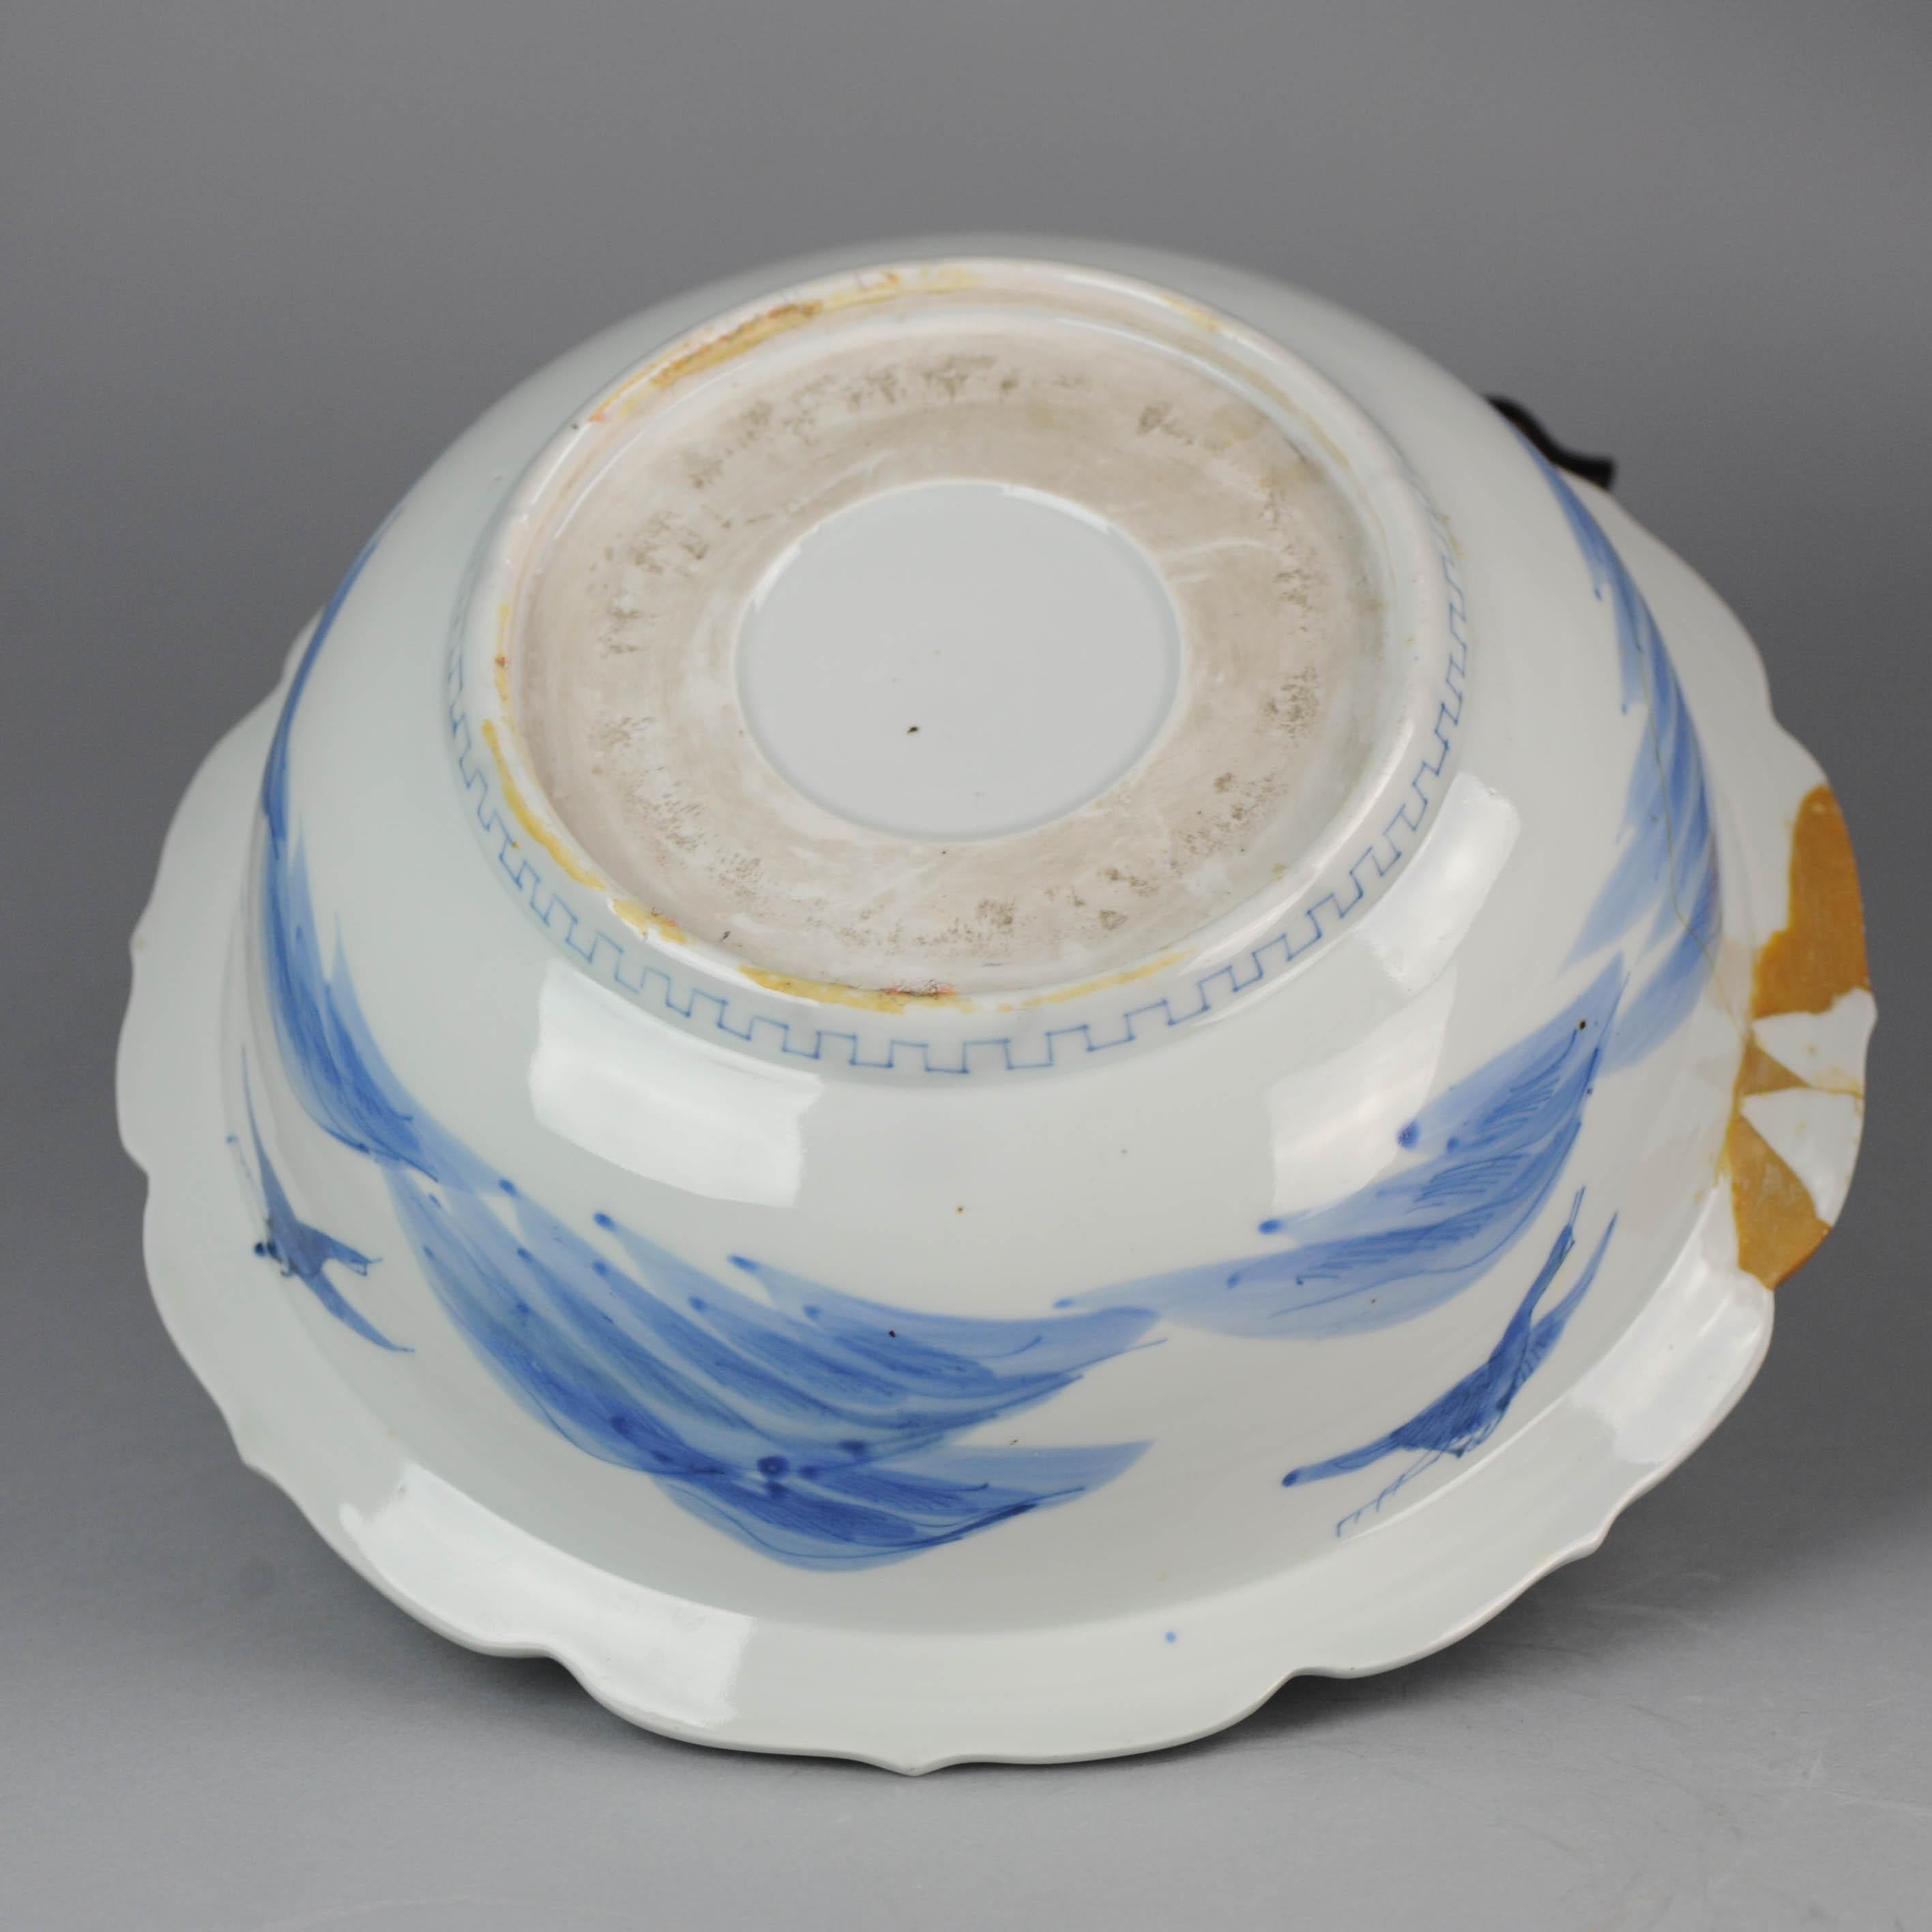 Antique Meiji Japanese Porcelain Bowl/Basins Dynastie, 19th Century In Good Condition For Sale In Amsterdam, Noord Holland